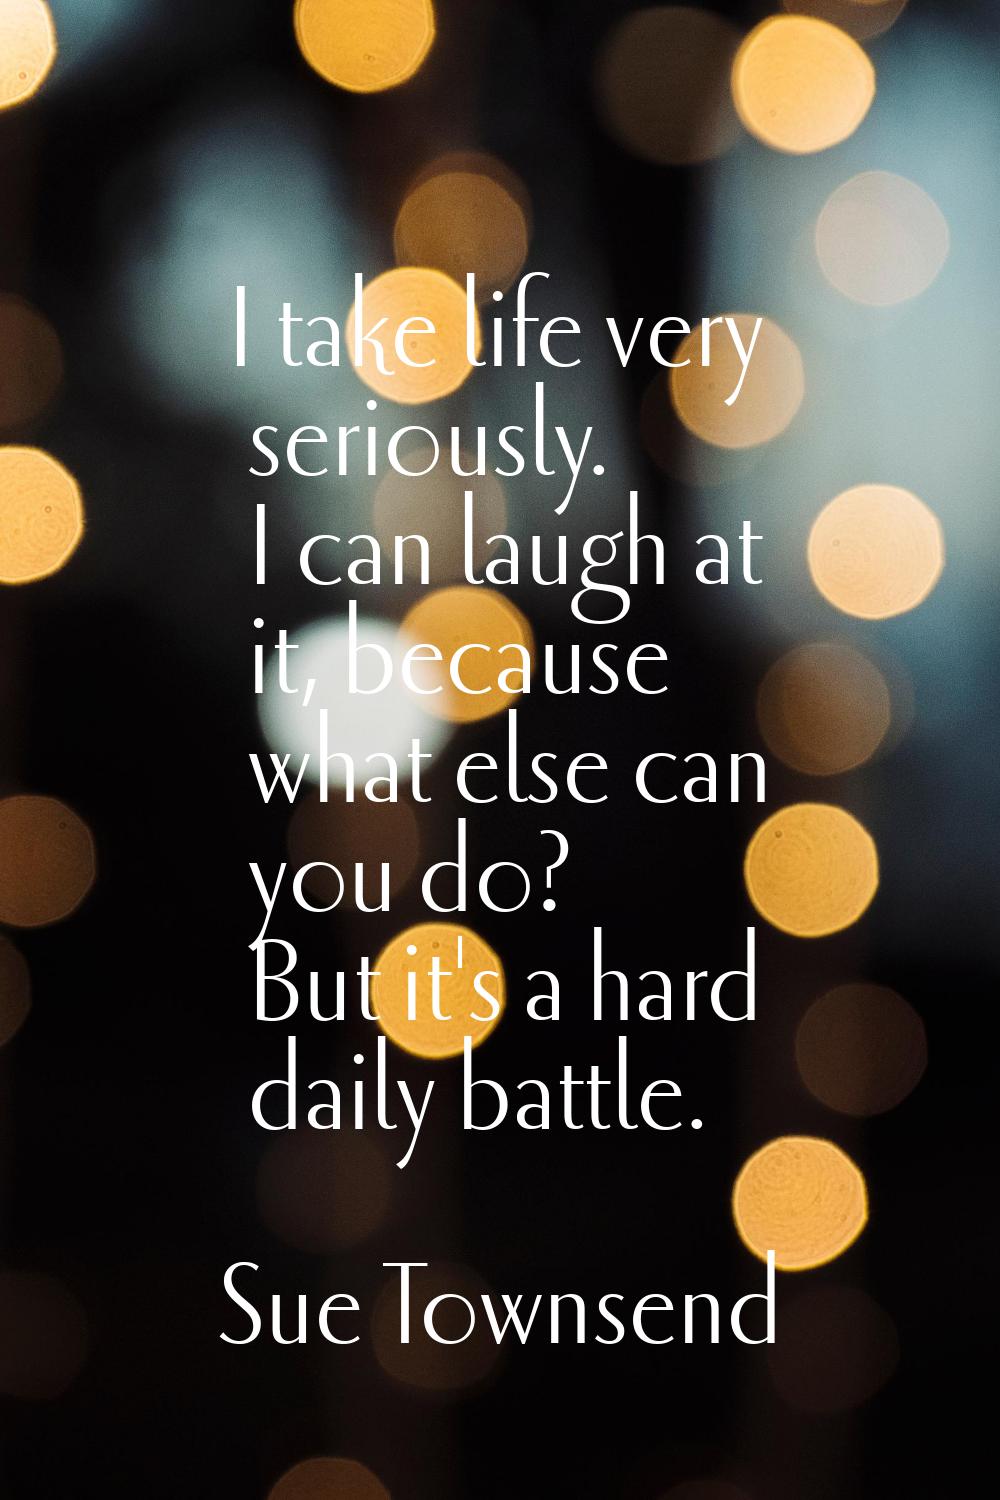 I take life very seriously. I can laugh at it, because what else can you do? But it's a hard daily 